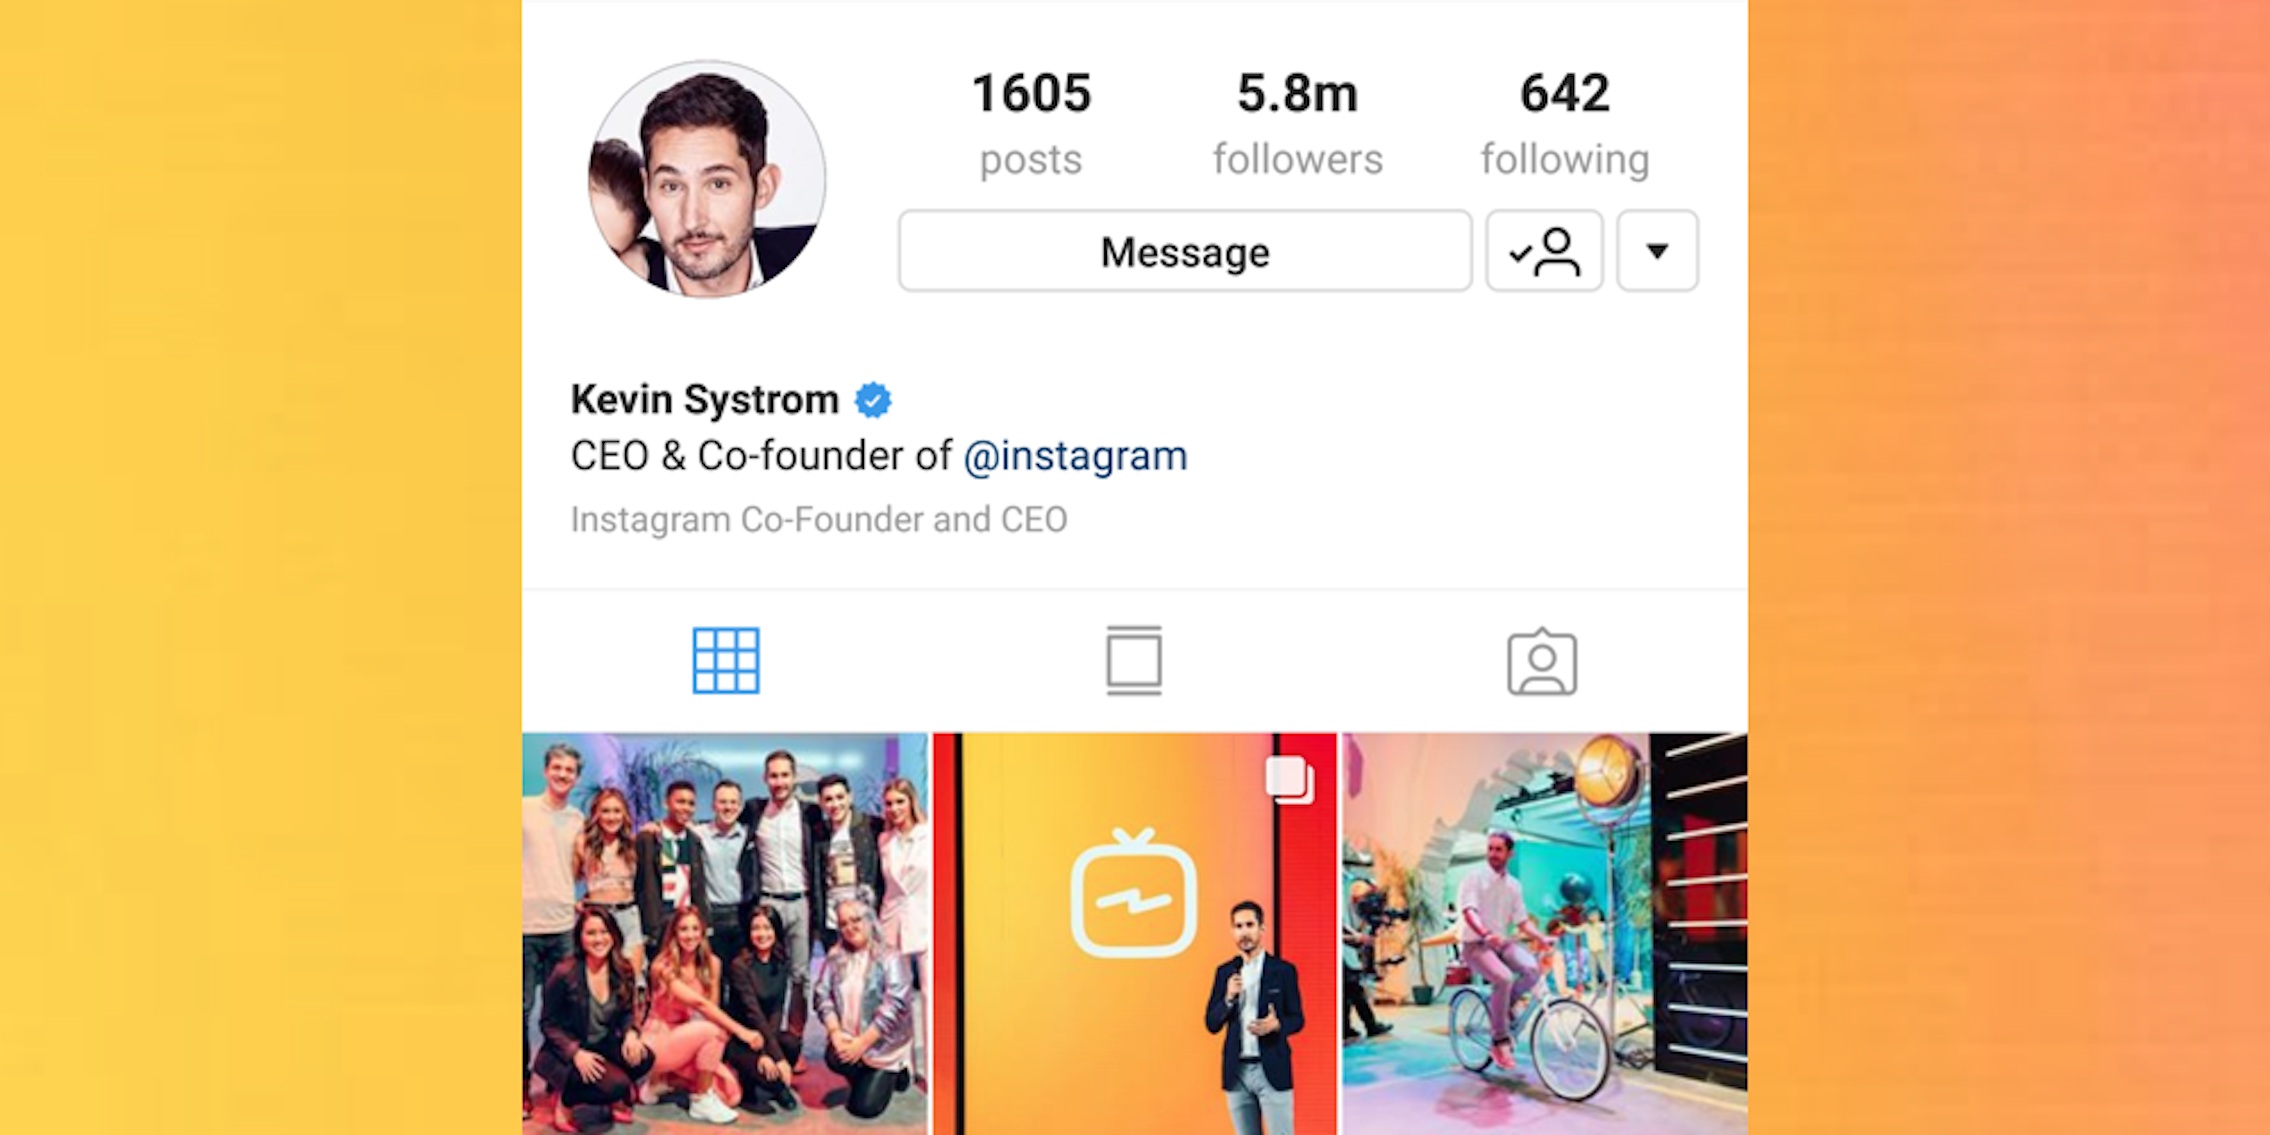 Verified status on Instagram, Kevin Systrom